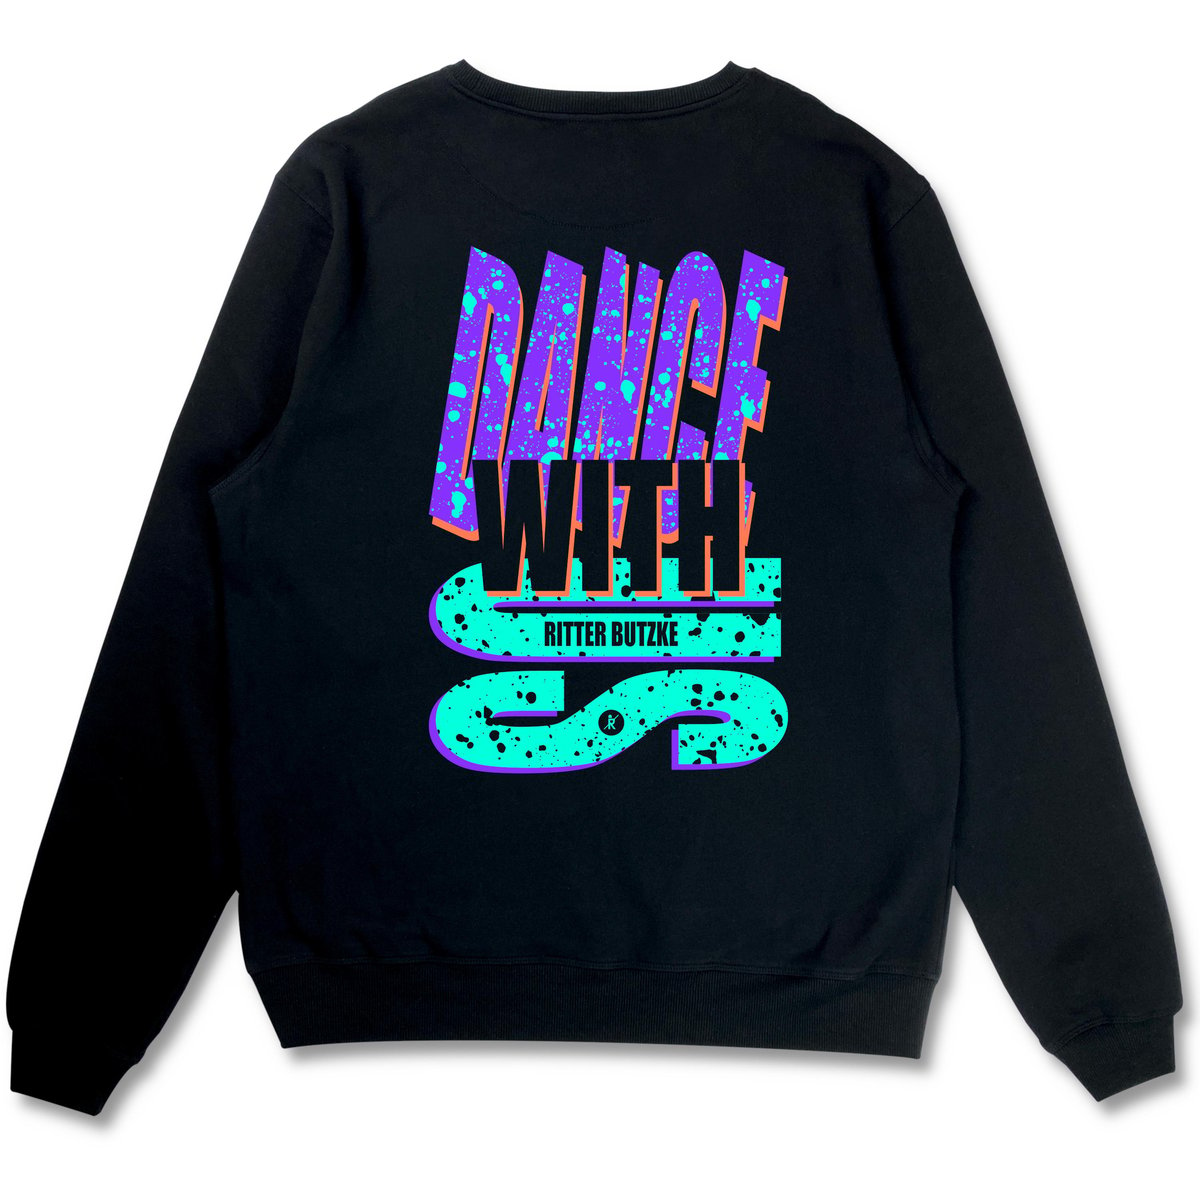 NEW Sweater "DANCE WITH US" DESIGNED BY JAN OBERLAENDER